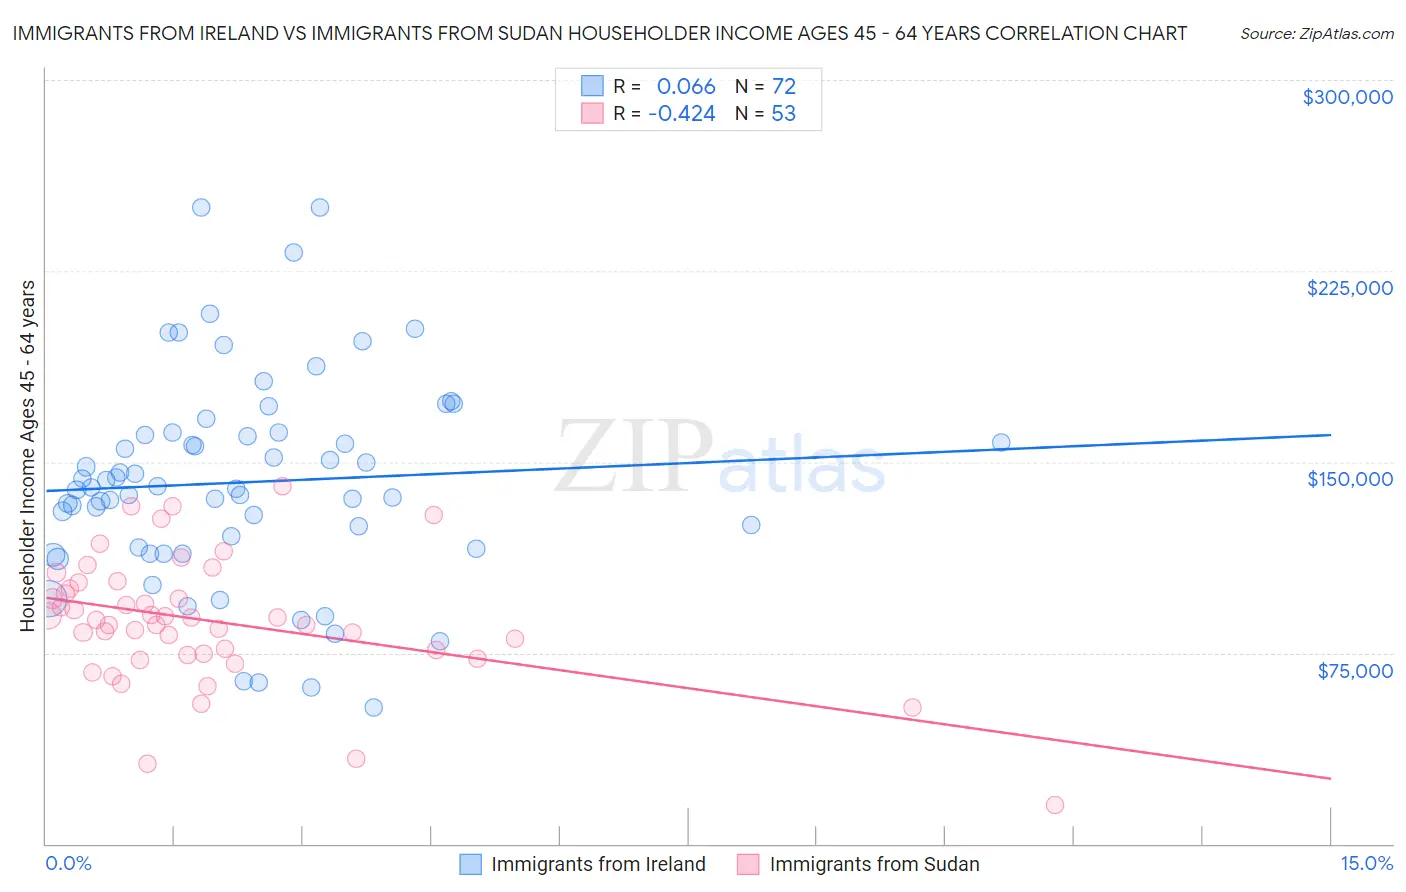 Immigrants from Ireland vs Immigrants from Sudan Householder Income Ages 45 - 64 years